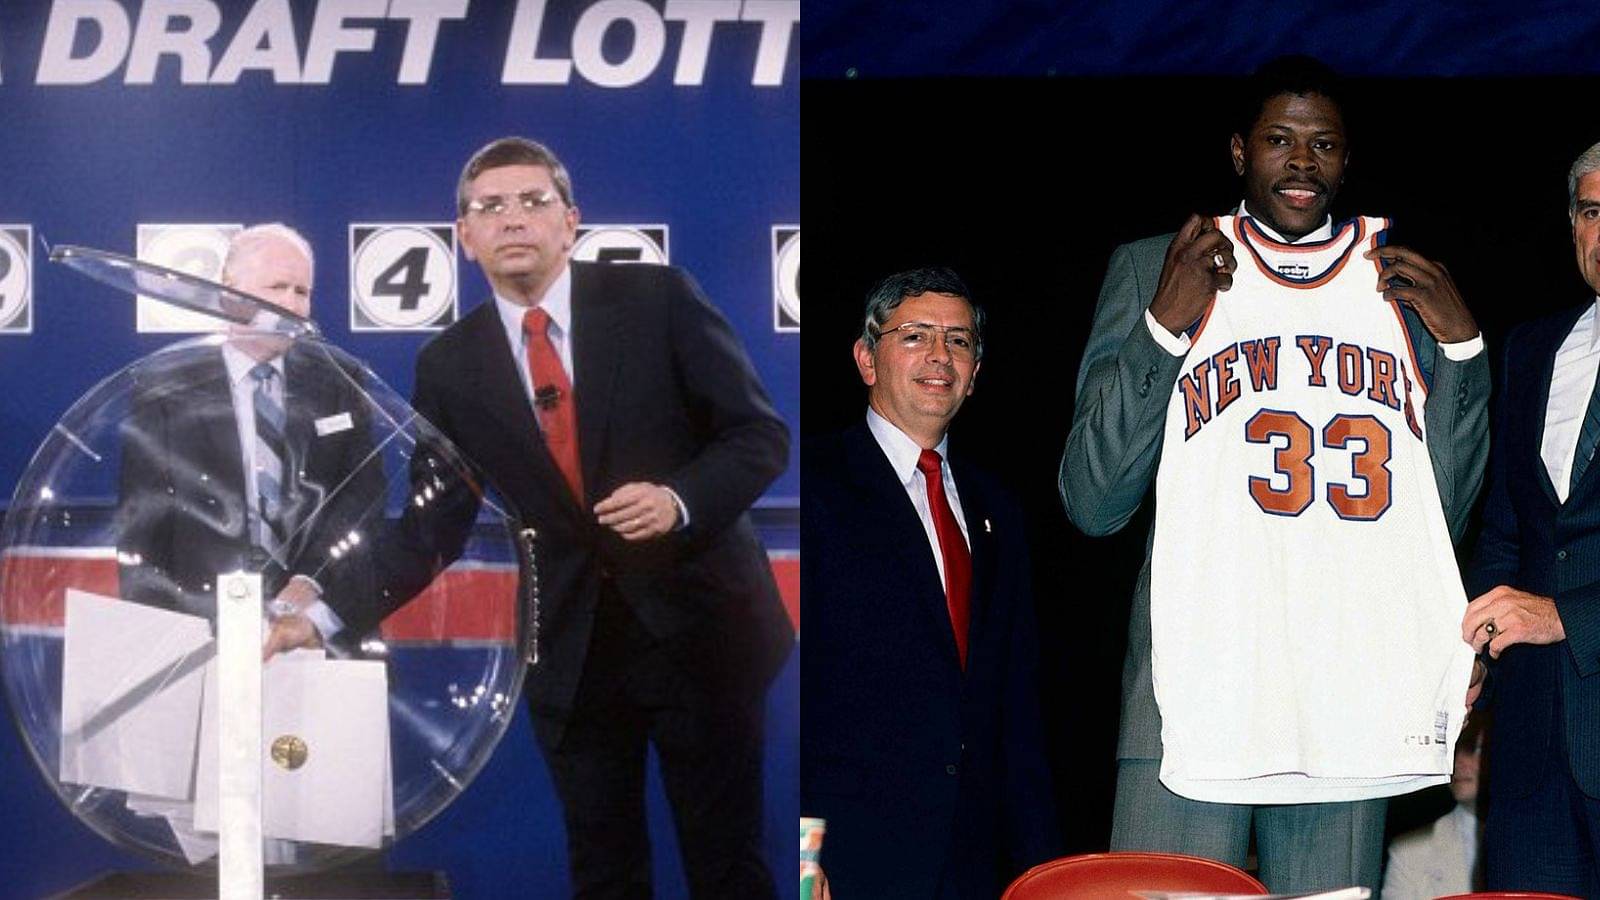 "Did David Stern rig the NBA Draft for the Knicks?": Patrick Ewing, New York's $17 million rookie might have been a set up